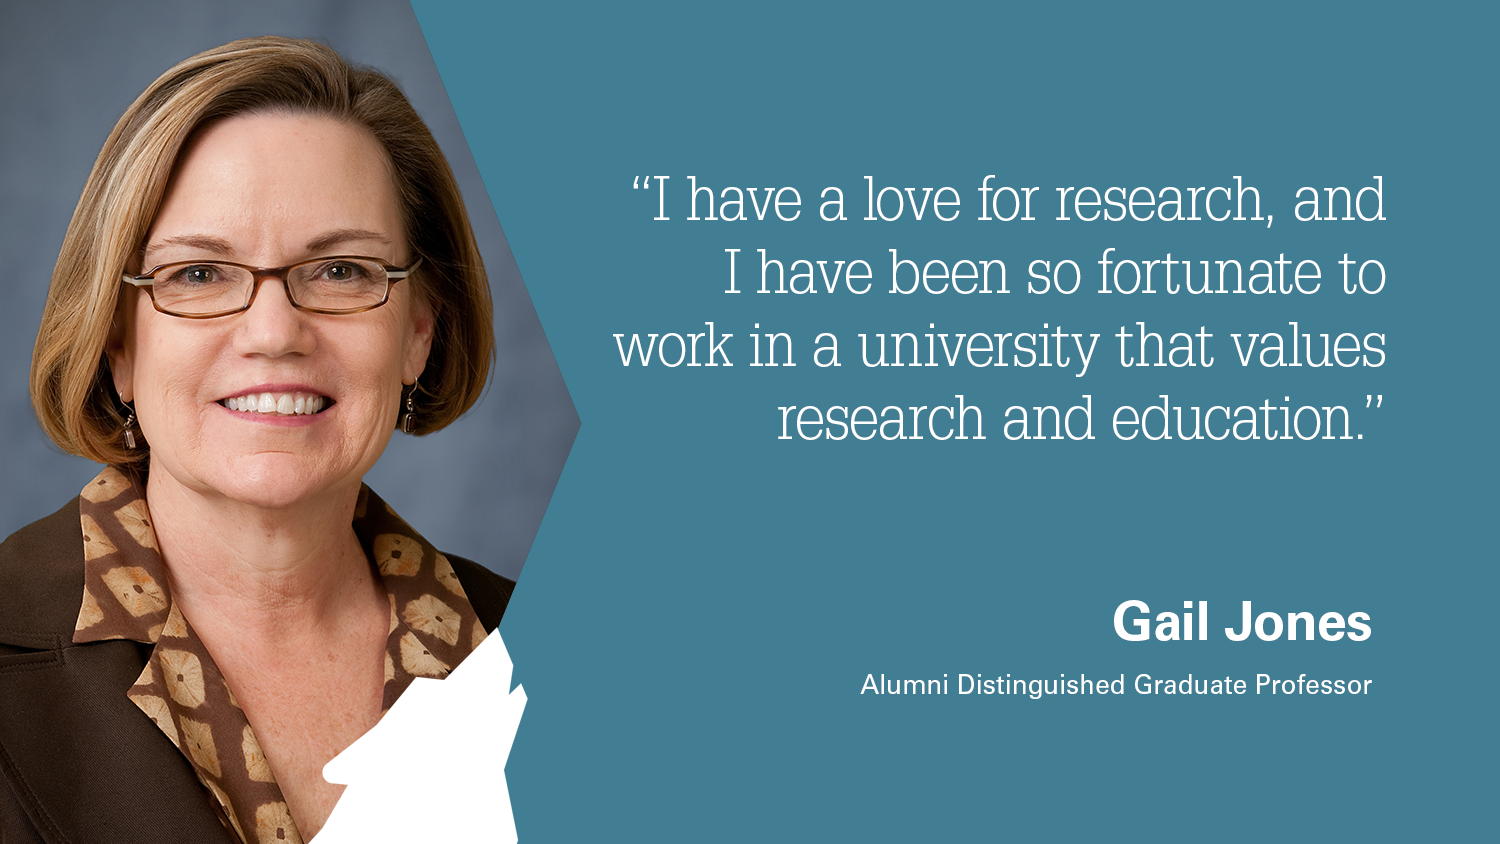 Graphic with image of Gail Jones with the accompanying text, "I have a love for research, and I have been so fortunate to work in a university that values research and education."